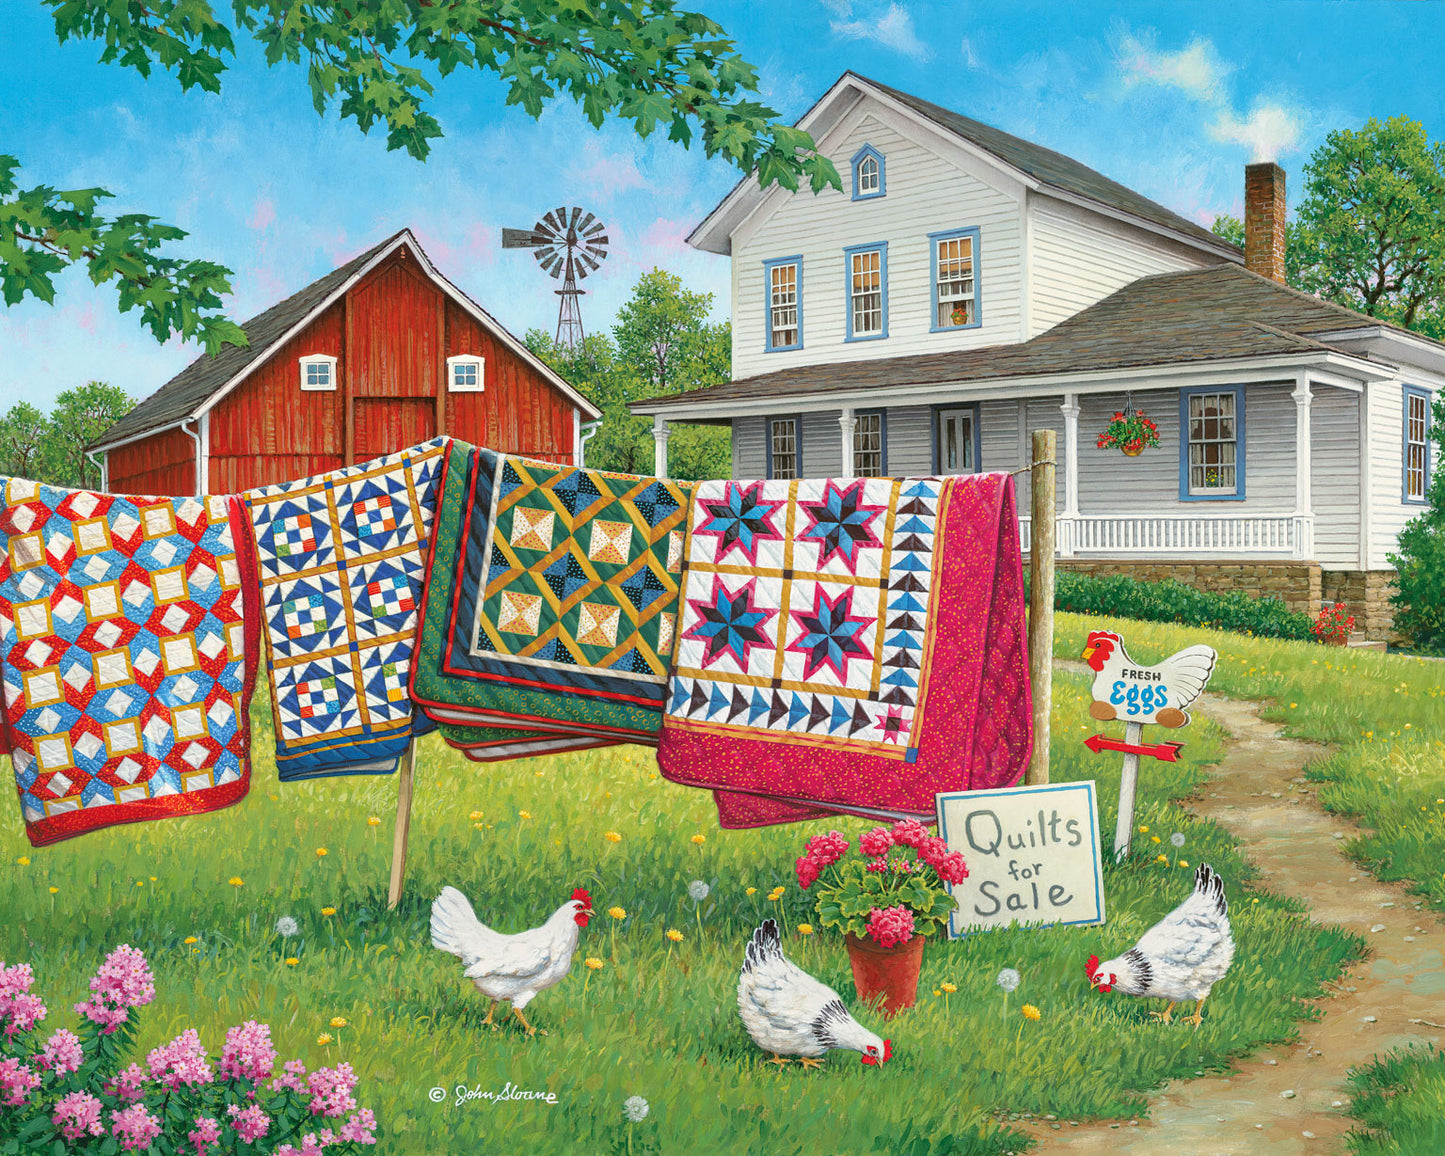 Fresh Eggs and More - Puzzle by John Sloane